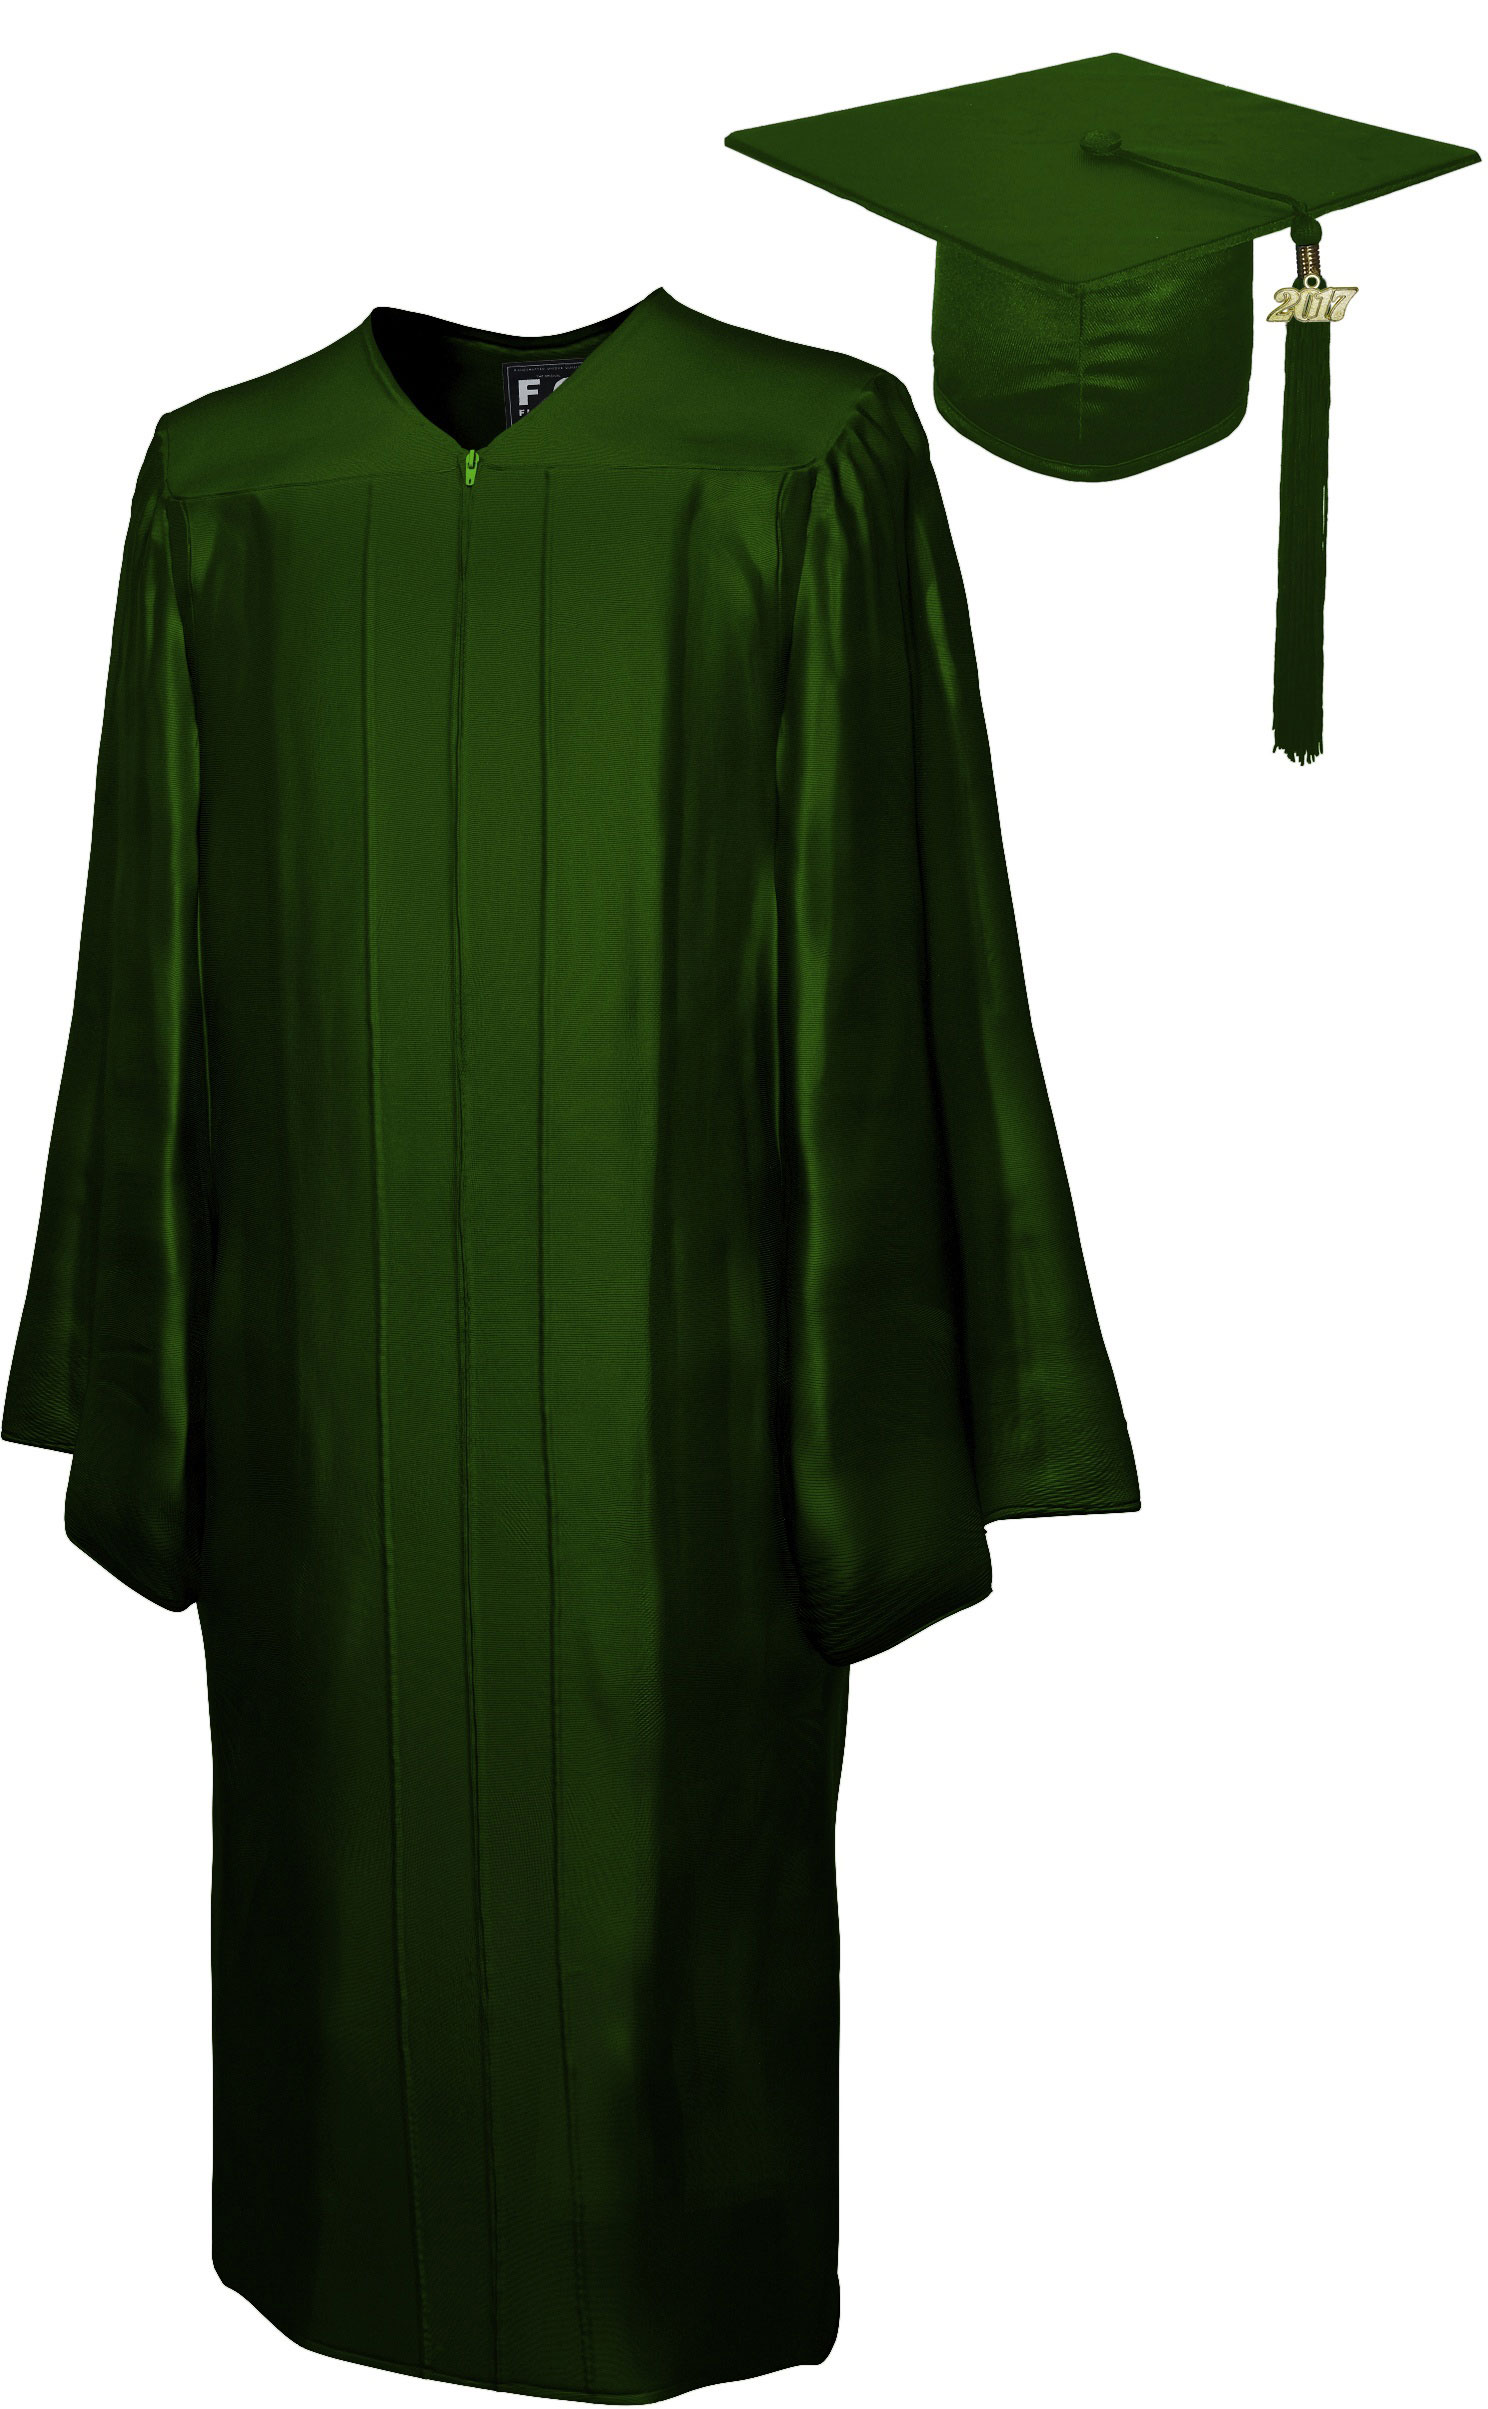 SHINY FOREST GREEN CAP AND GOWN-rs4251465611119